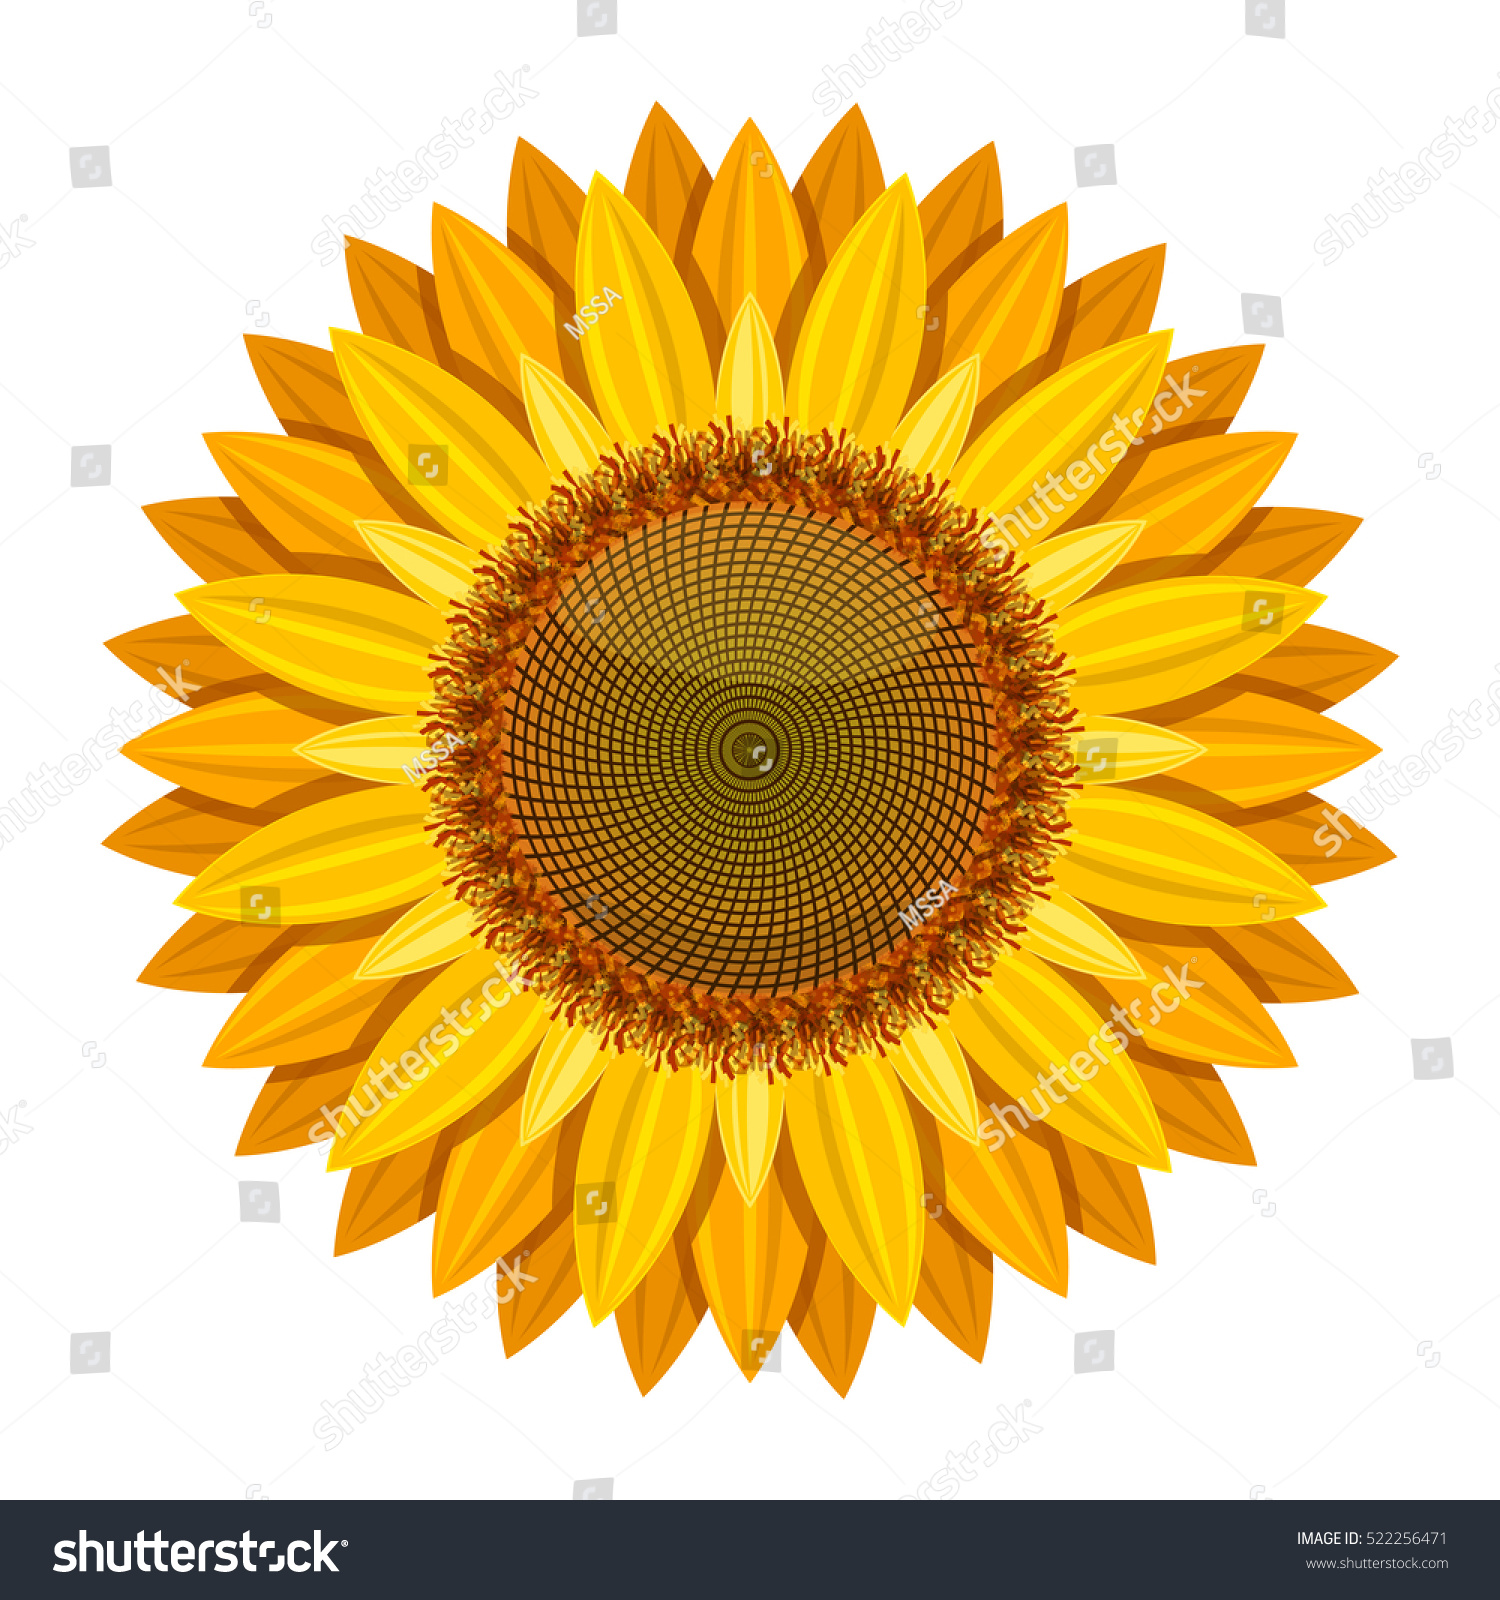 Sunflower Vector Isolated On White Background Stock Vector HD ...